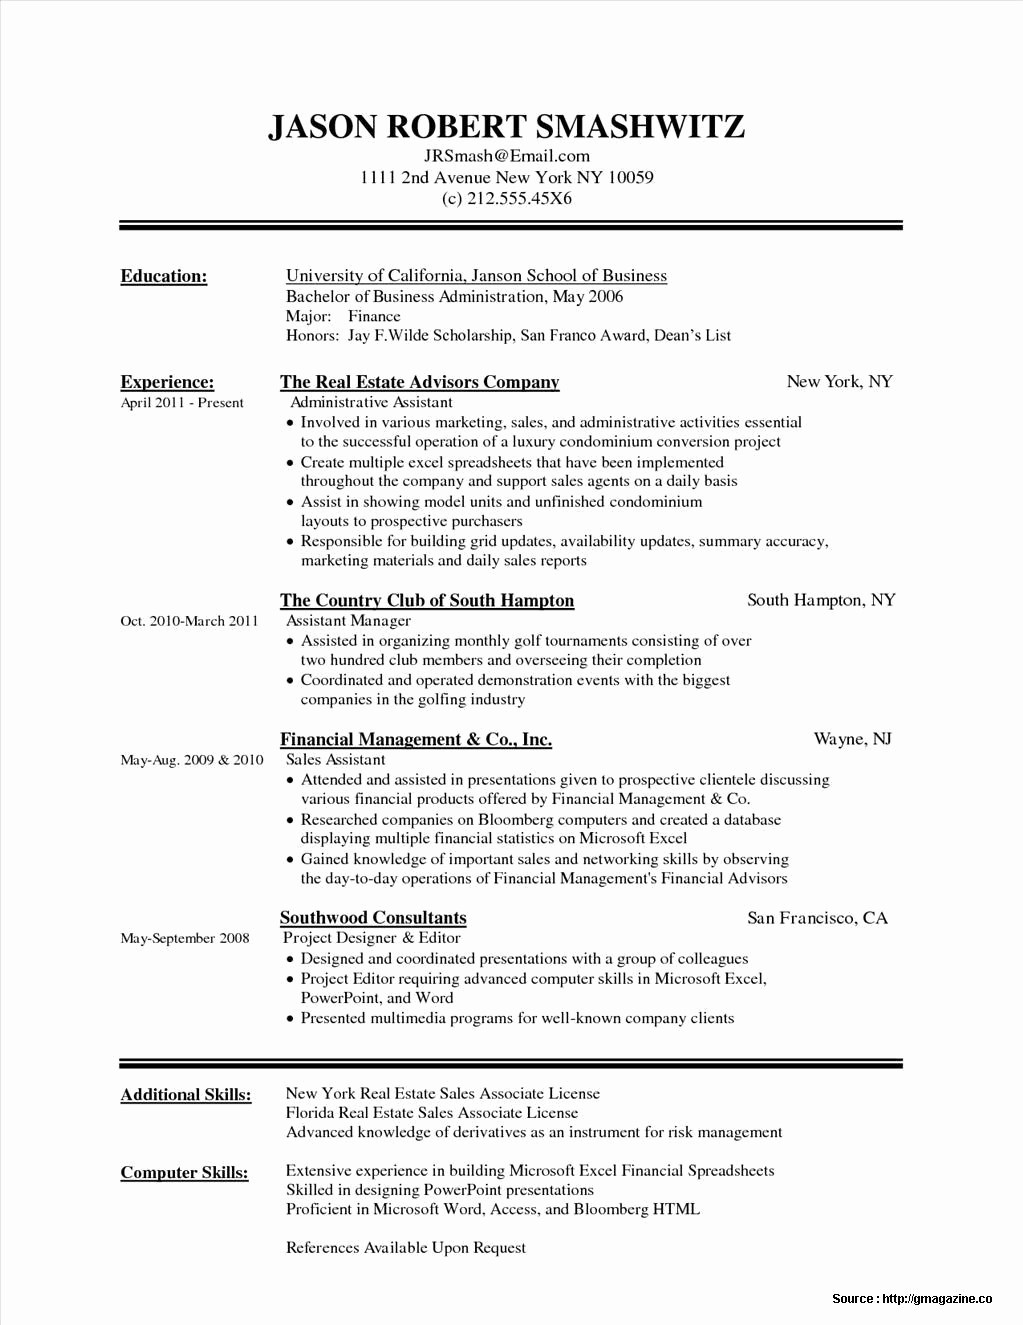 Resume Examples In Word format New Sample Resume Word Document Free Download Resume